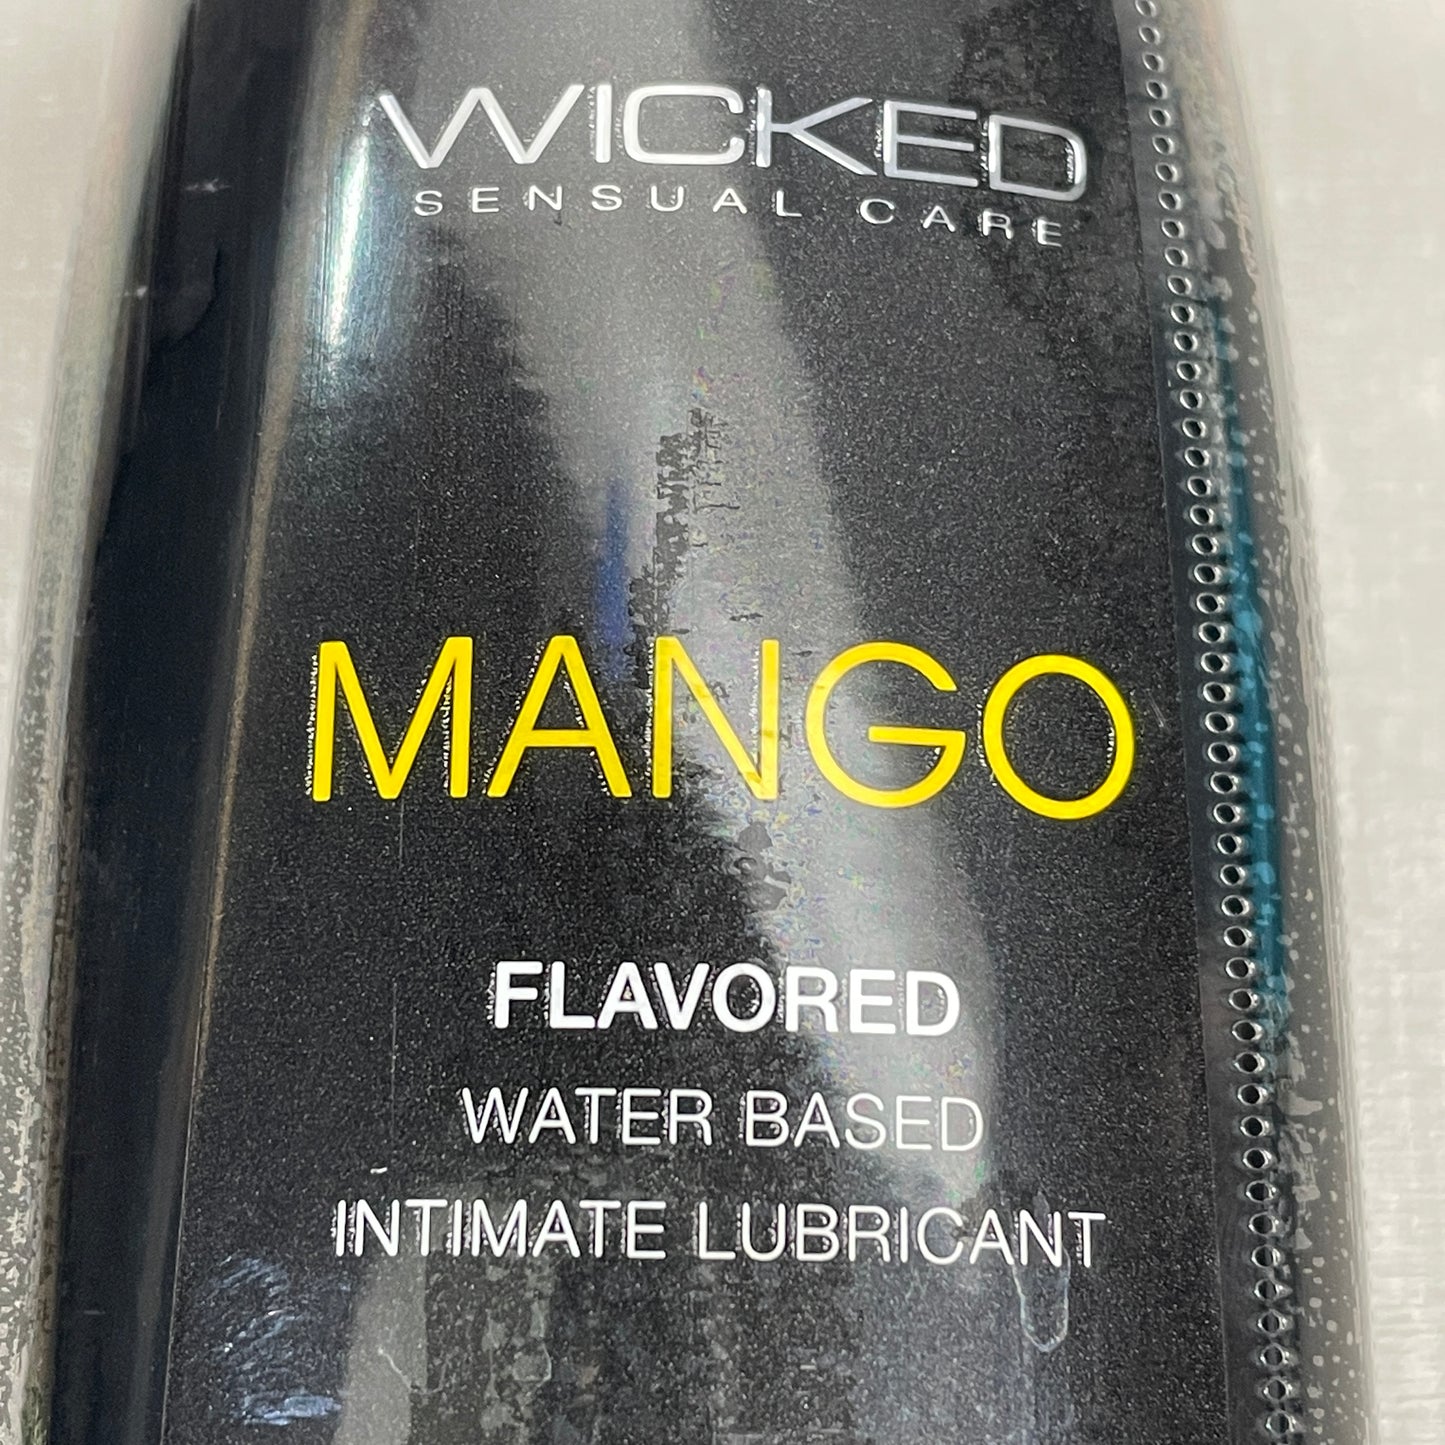 WICKED SENSUAL CARE Mango Flavored Water Based Intimate Lubricant 4 oz Exp 10/23 (New)